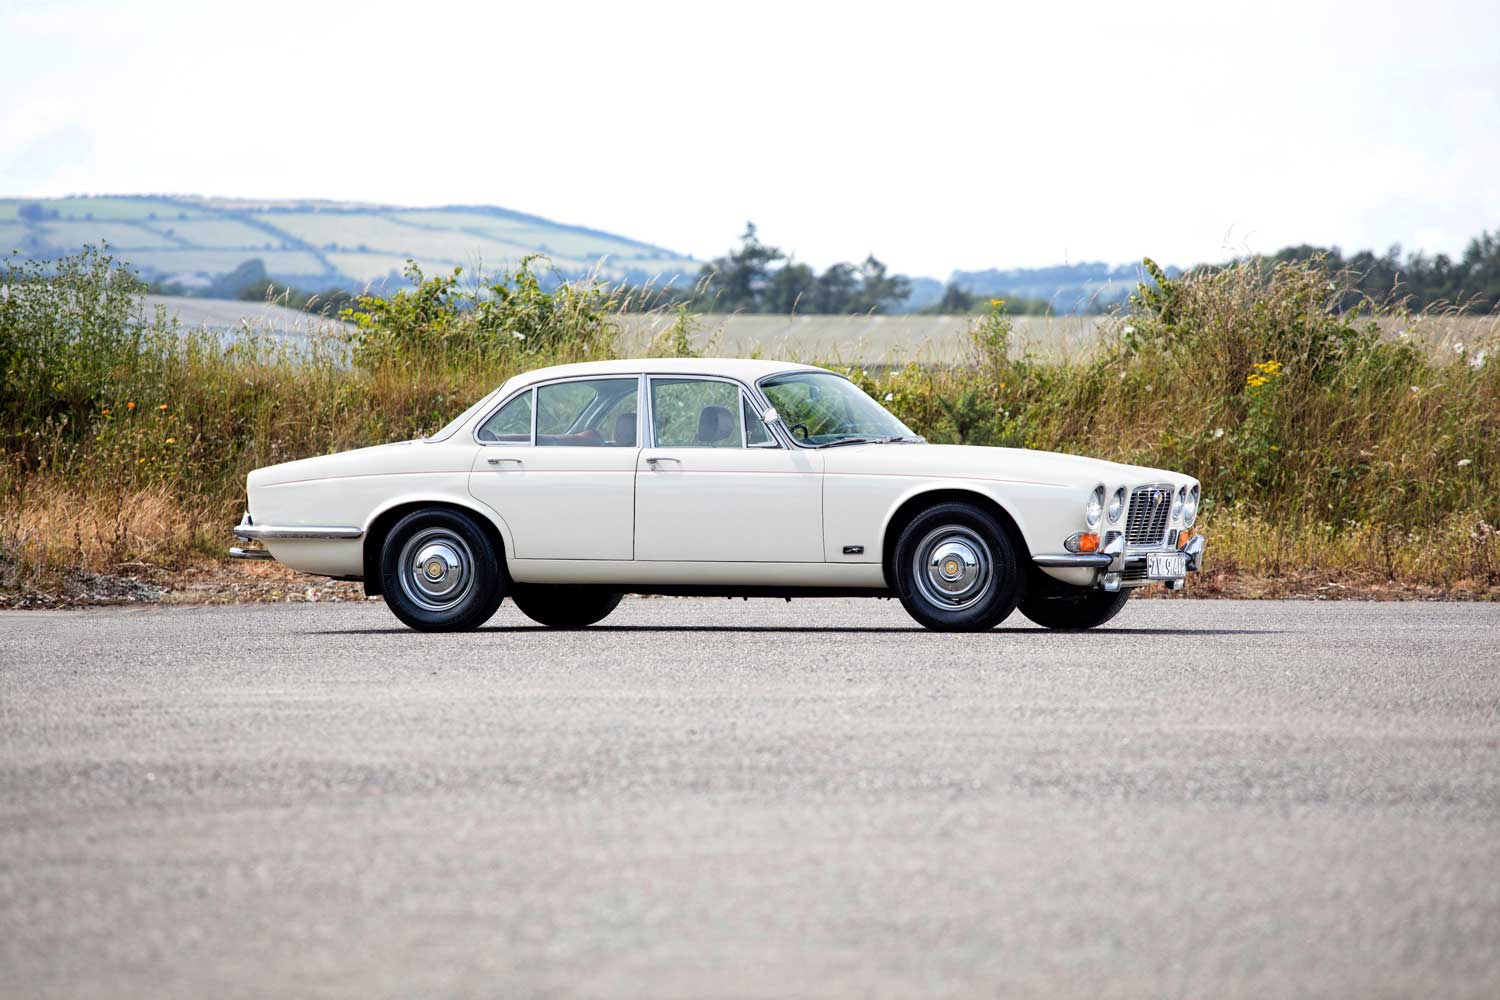 3,750 Swiss francs— the cost of a Jaguar XJ6 in 1972 was the same as that of the Royal Oak at launch (Image: bonhams.com)